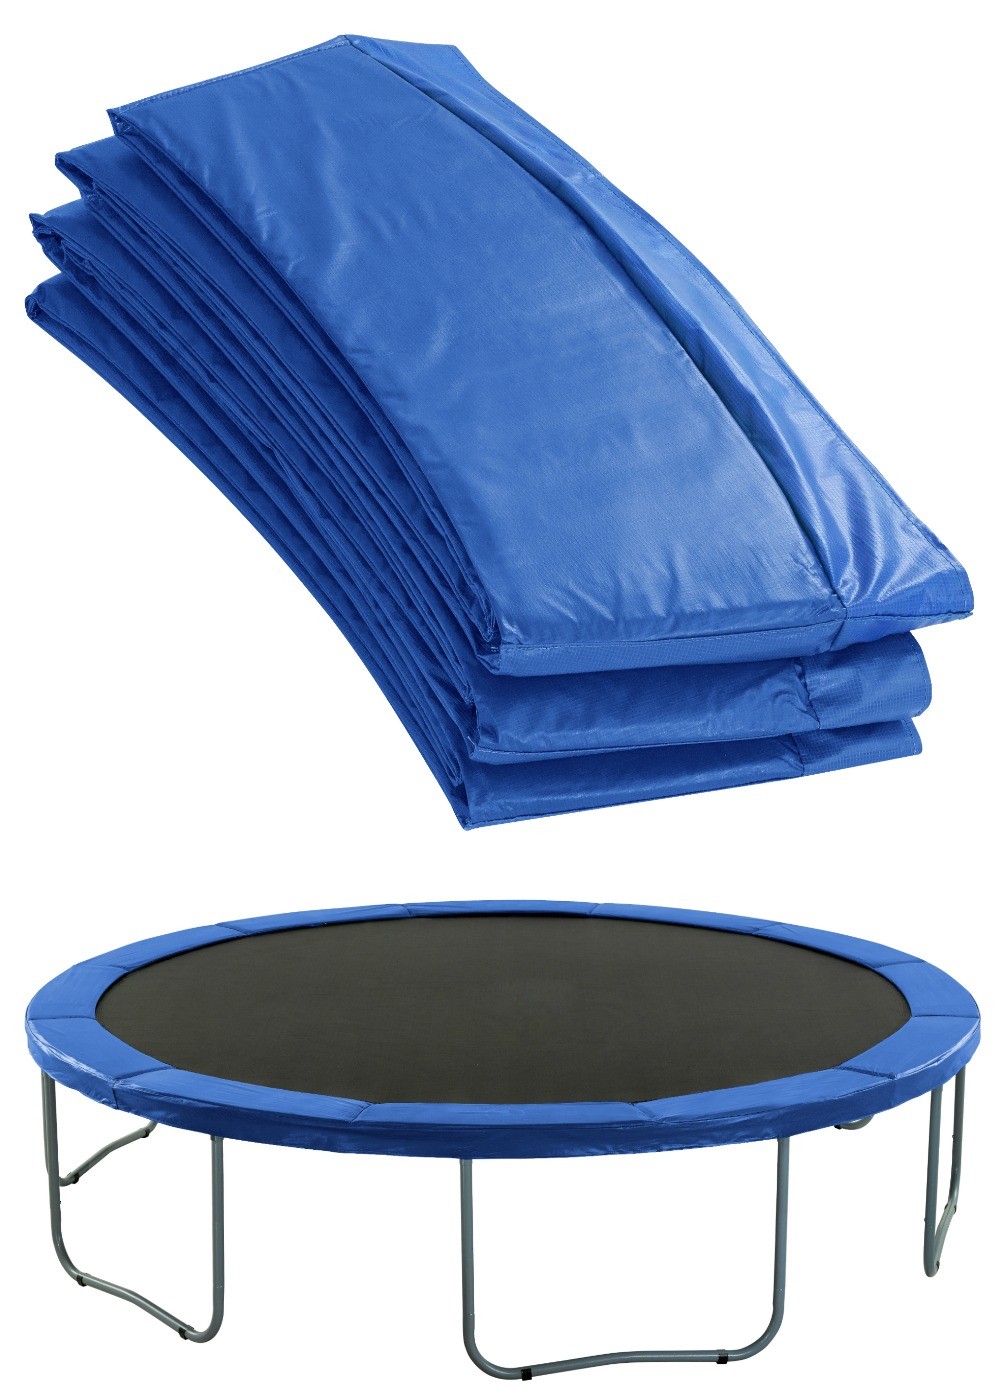 Premium Trampoline Replacement Safety Pad (Spring Cover) Fits for 8 FT. Round Frames - 3/4" Foam | Blue